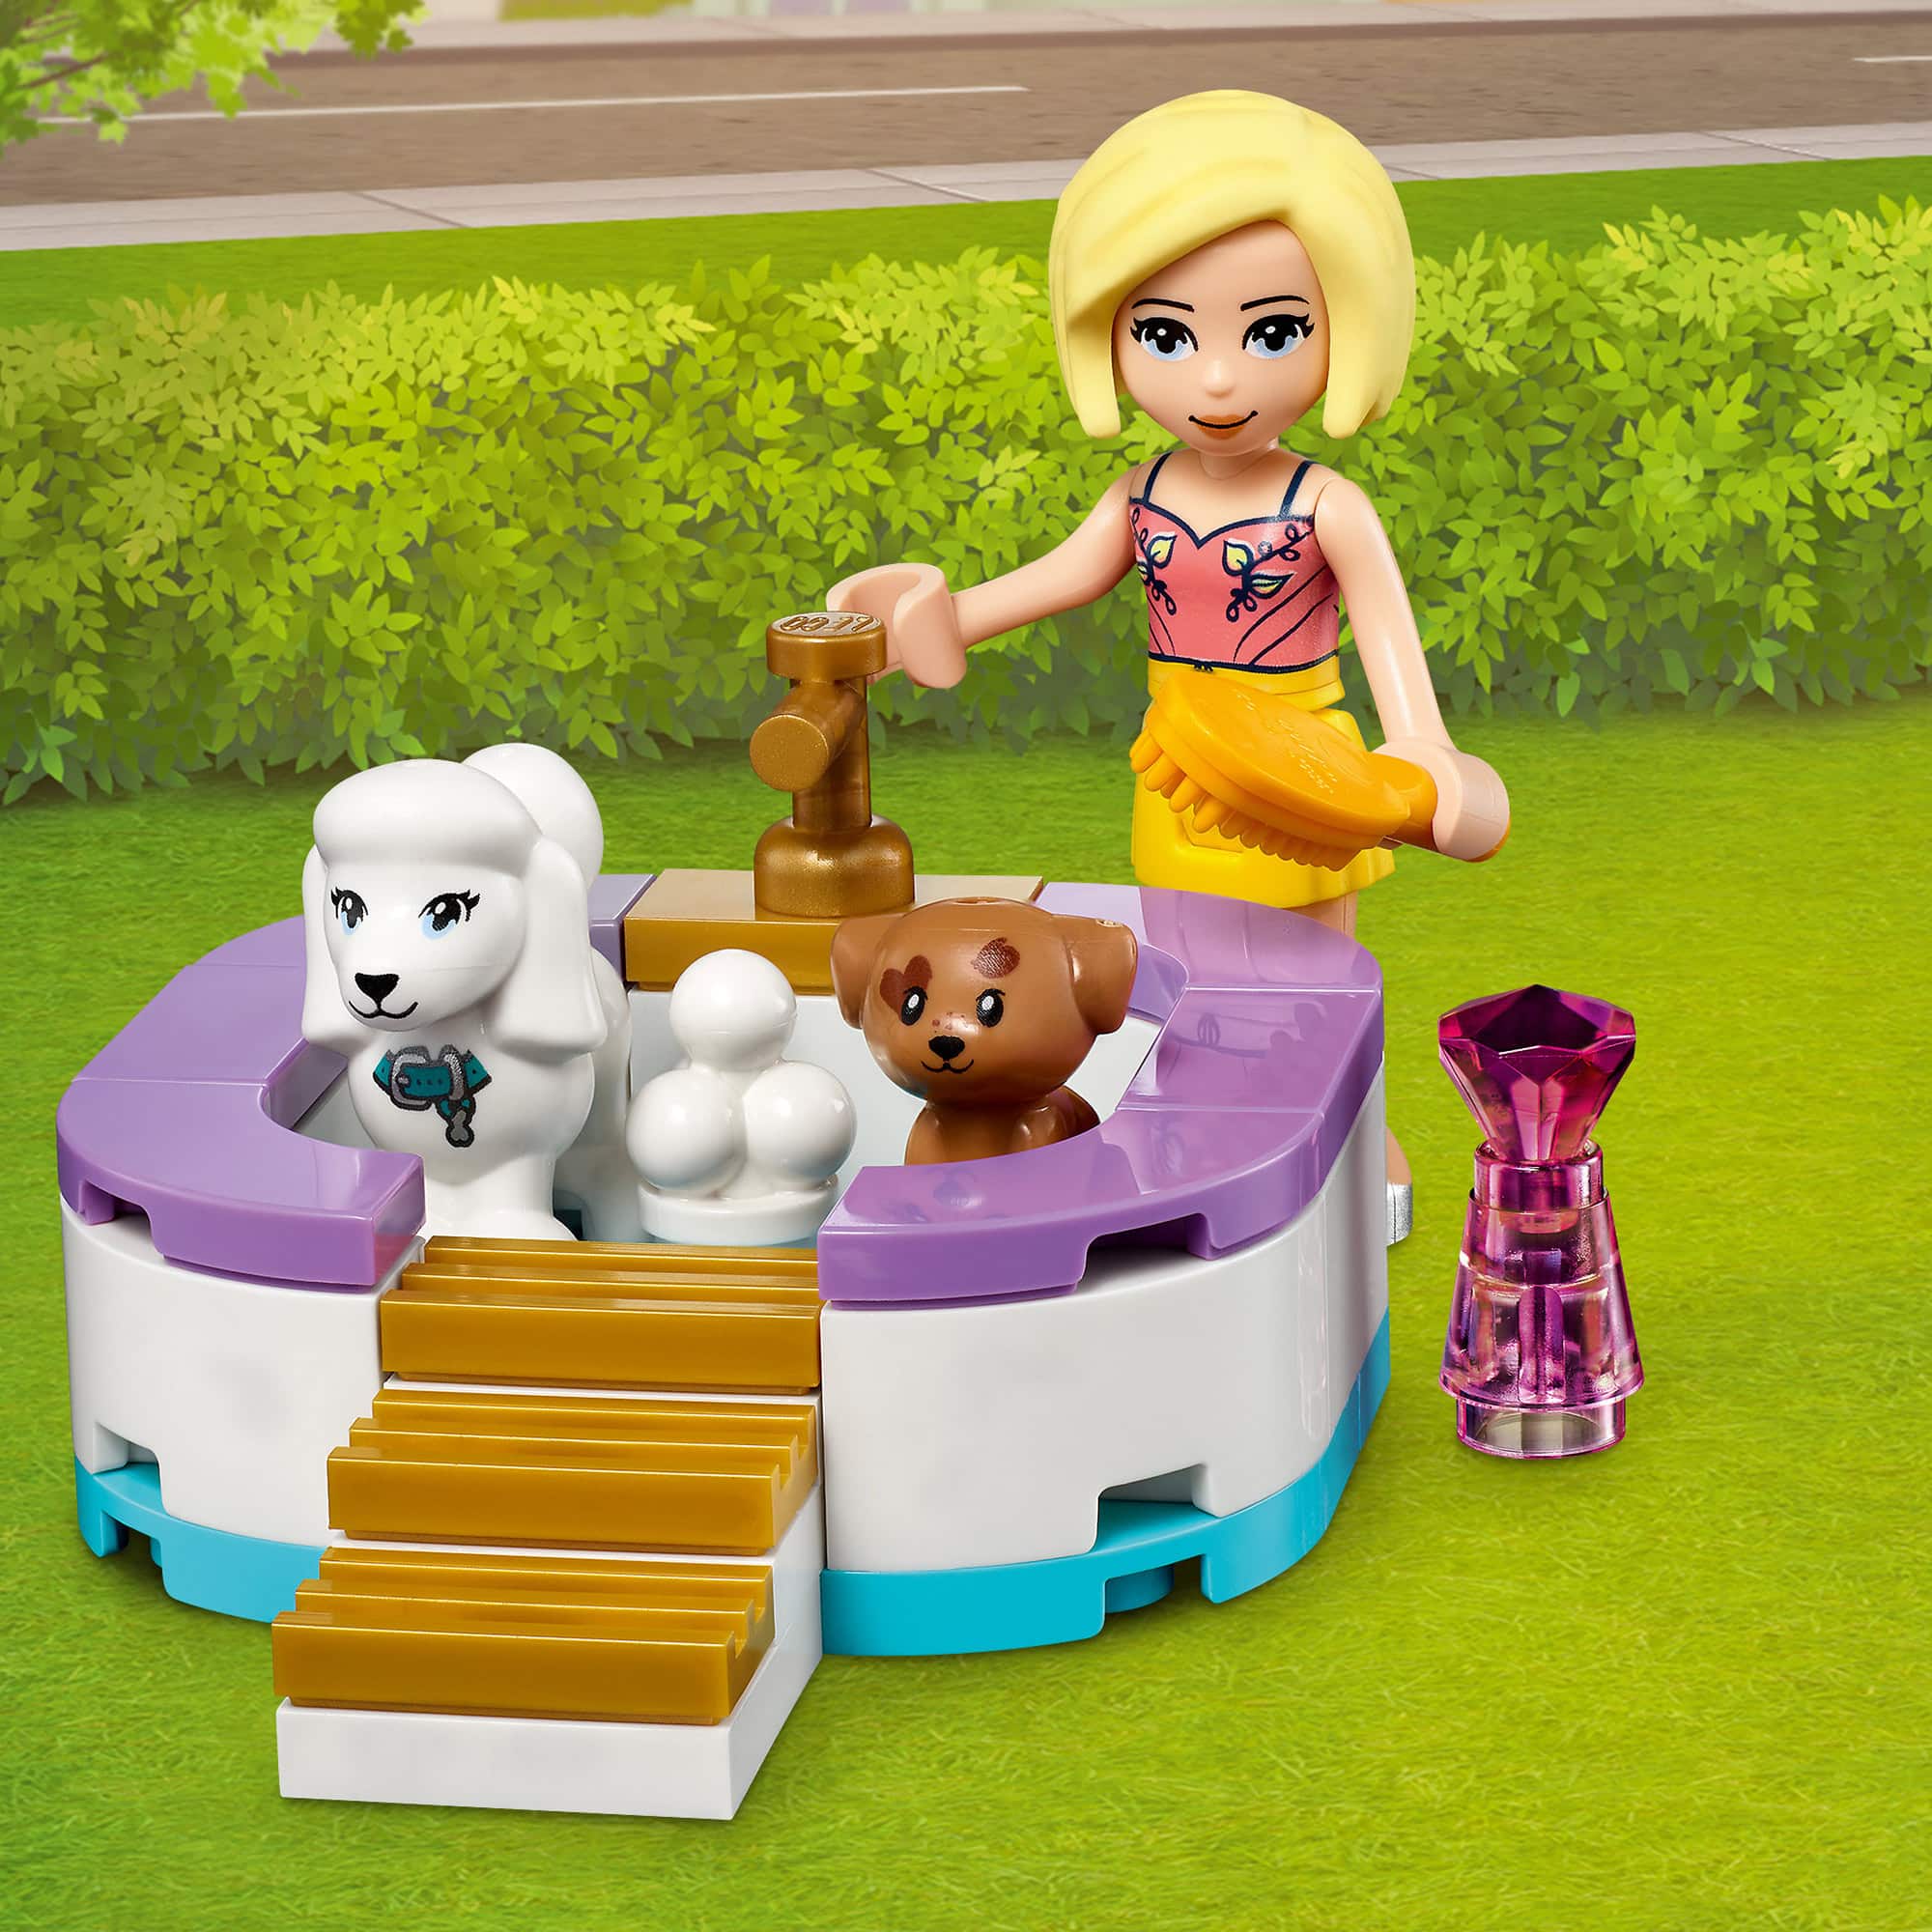 LEGO Friends 41691 - Doggy Day Care